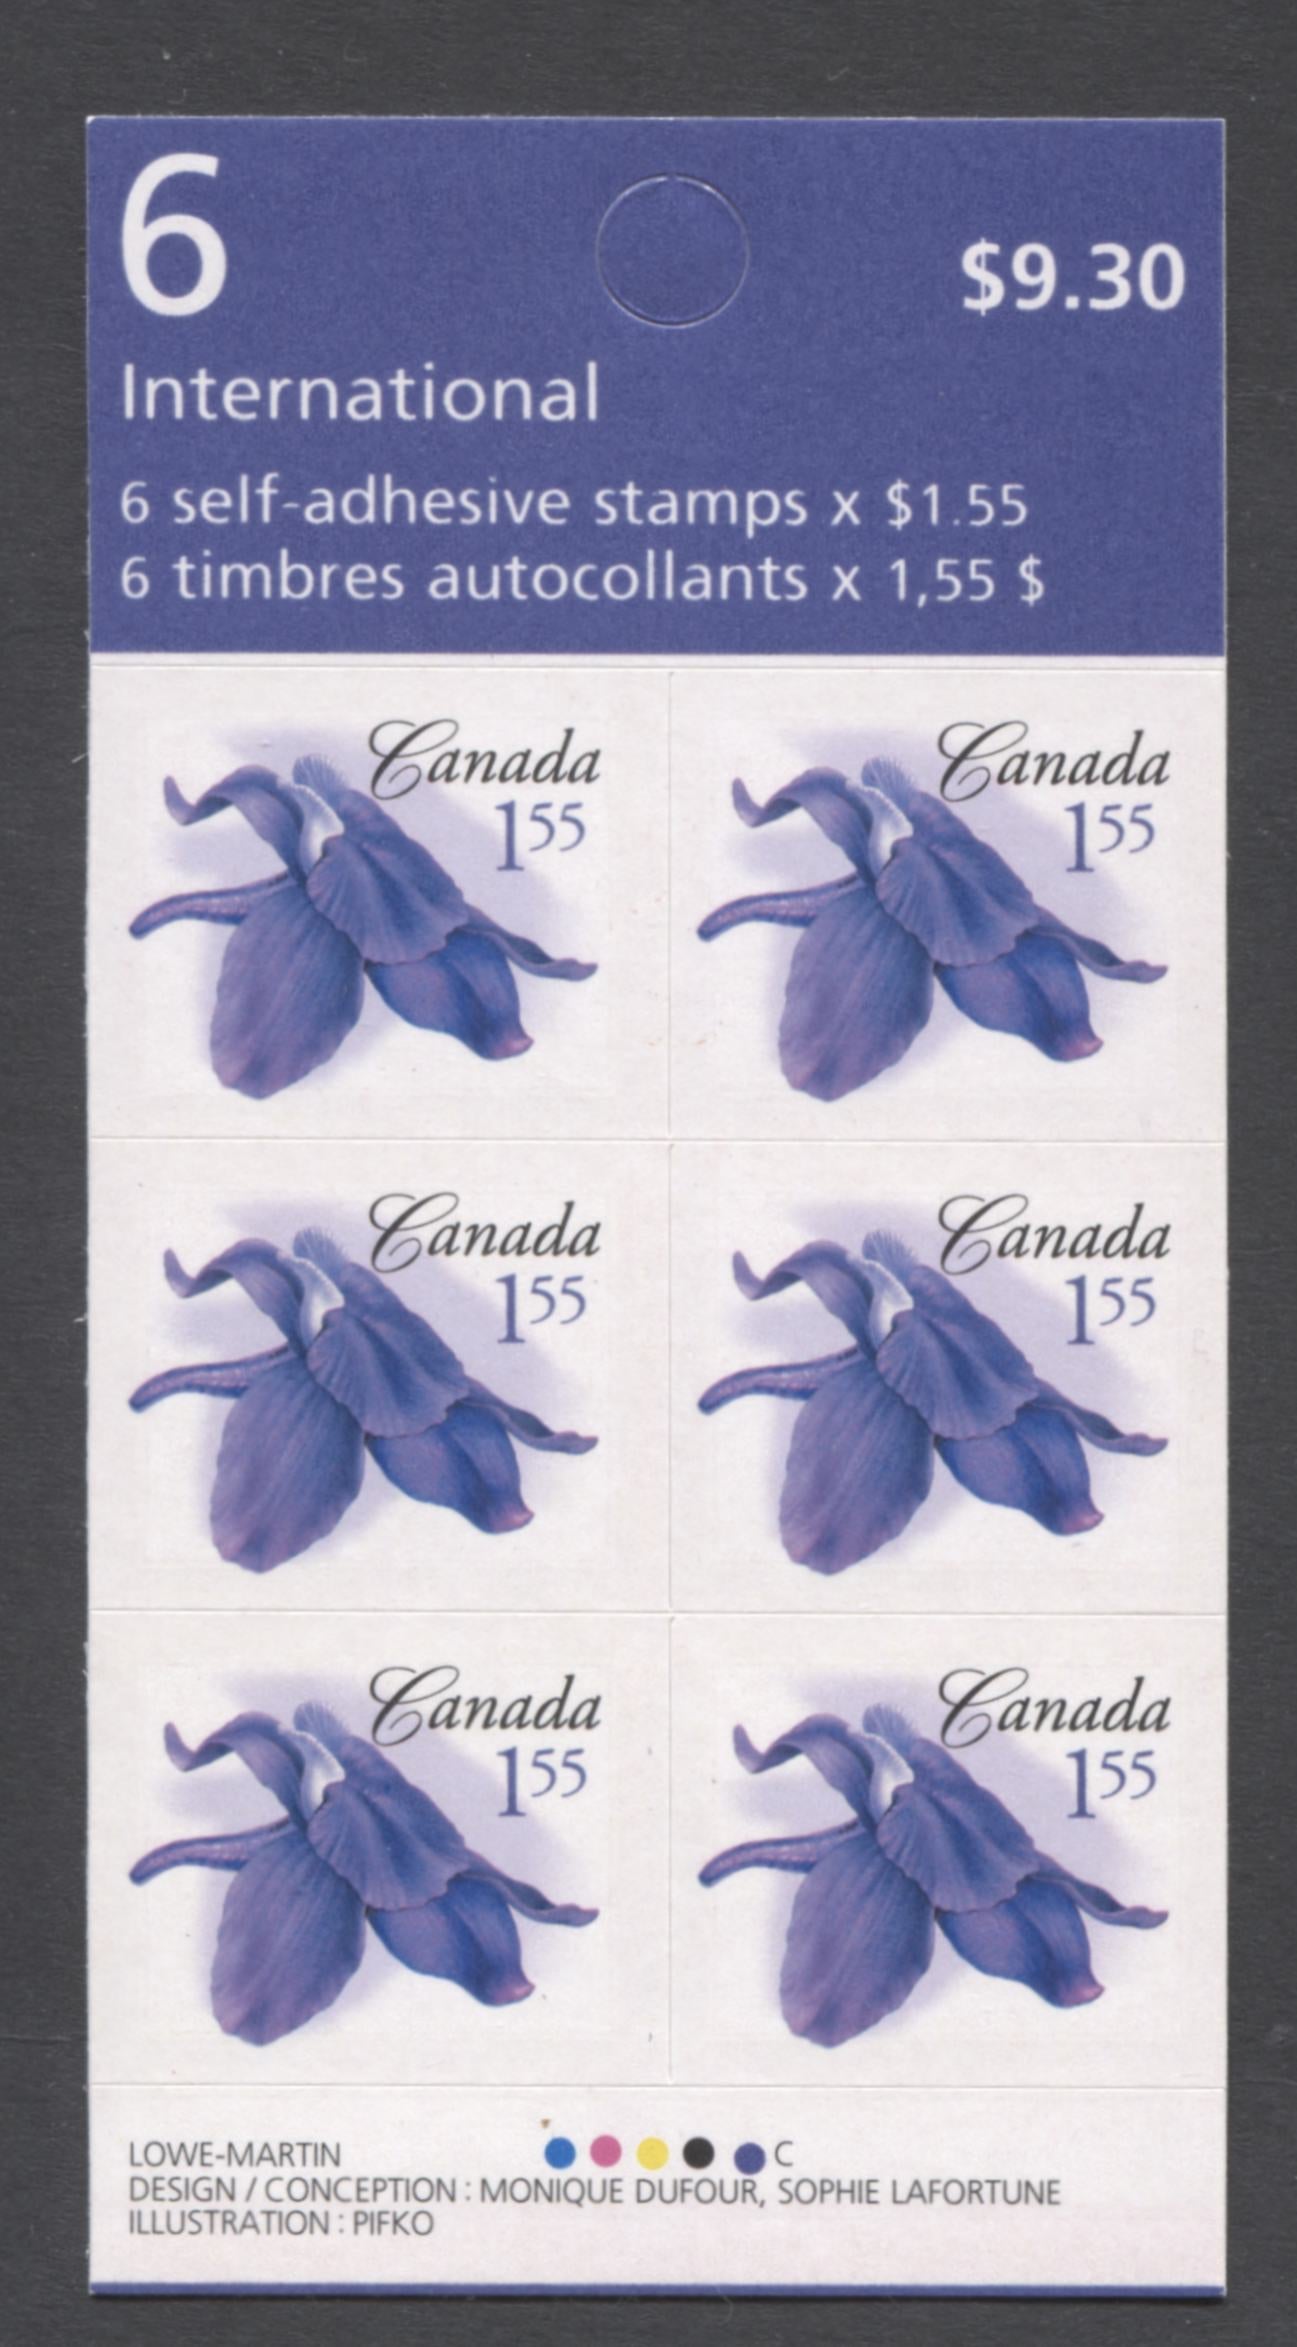 Canada #BK345-A 2004-2010 Floral & Canadian Pride Definitives, Complete $9.30 Booklet, Tullis Russell Coatings Paper, Dead Paper, 4 mm GT-4 Tagging